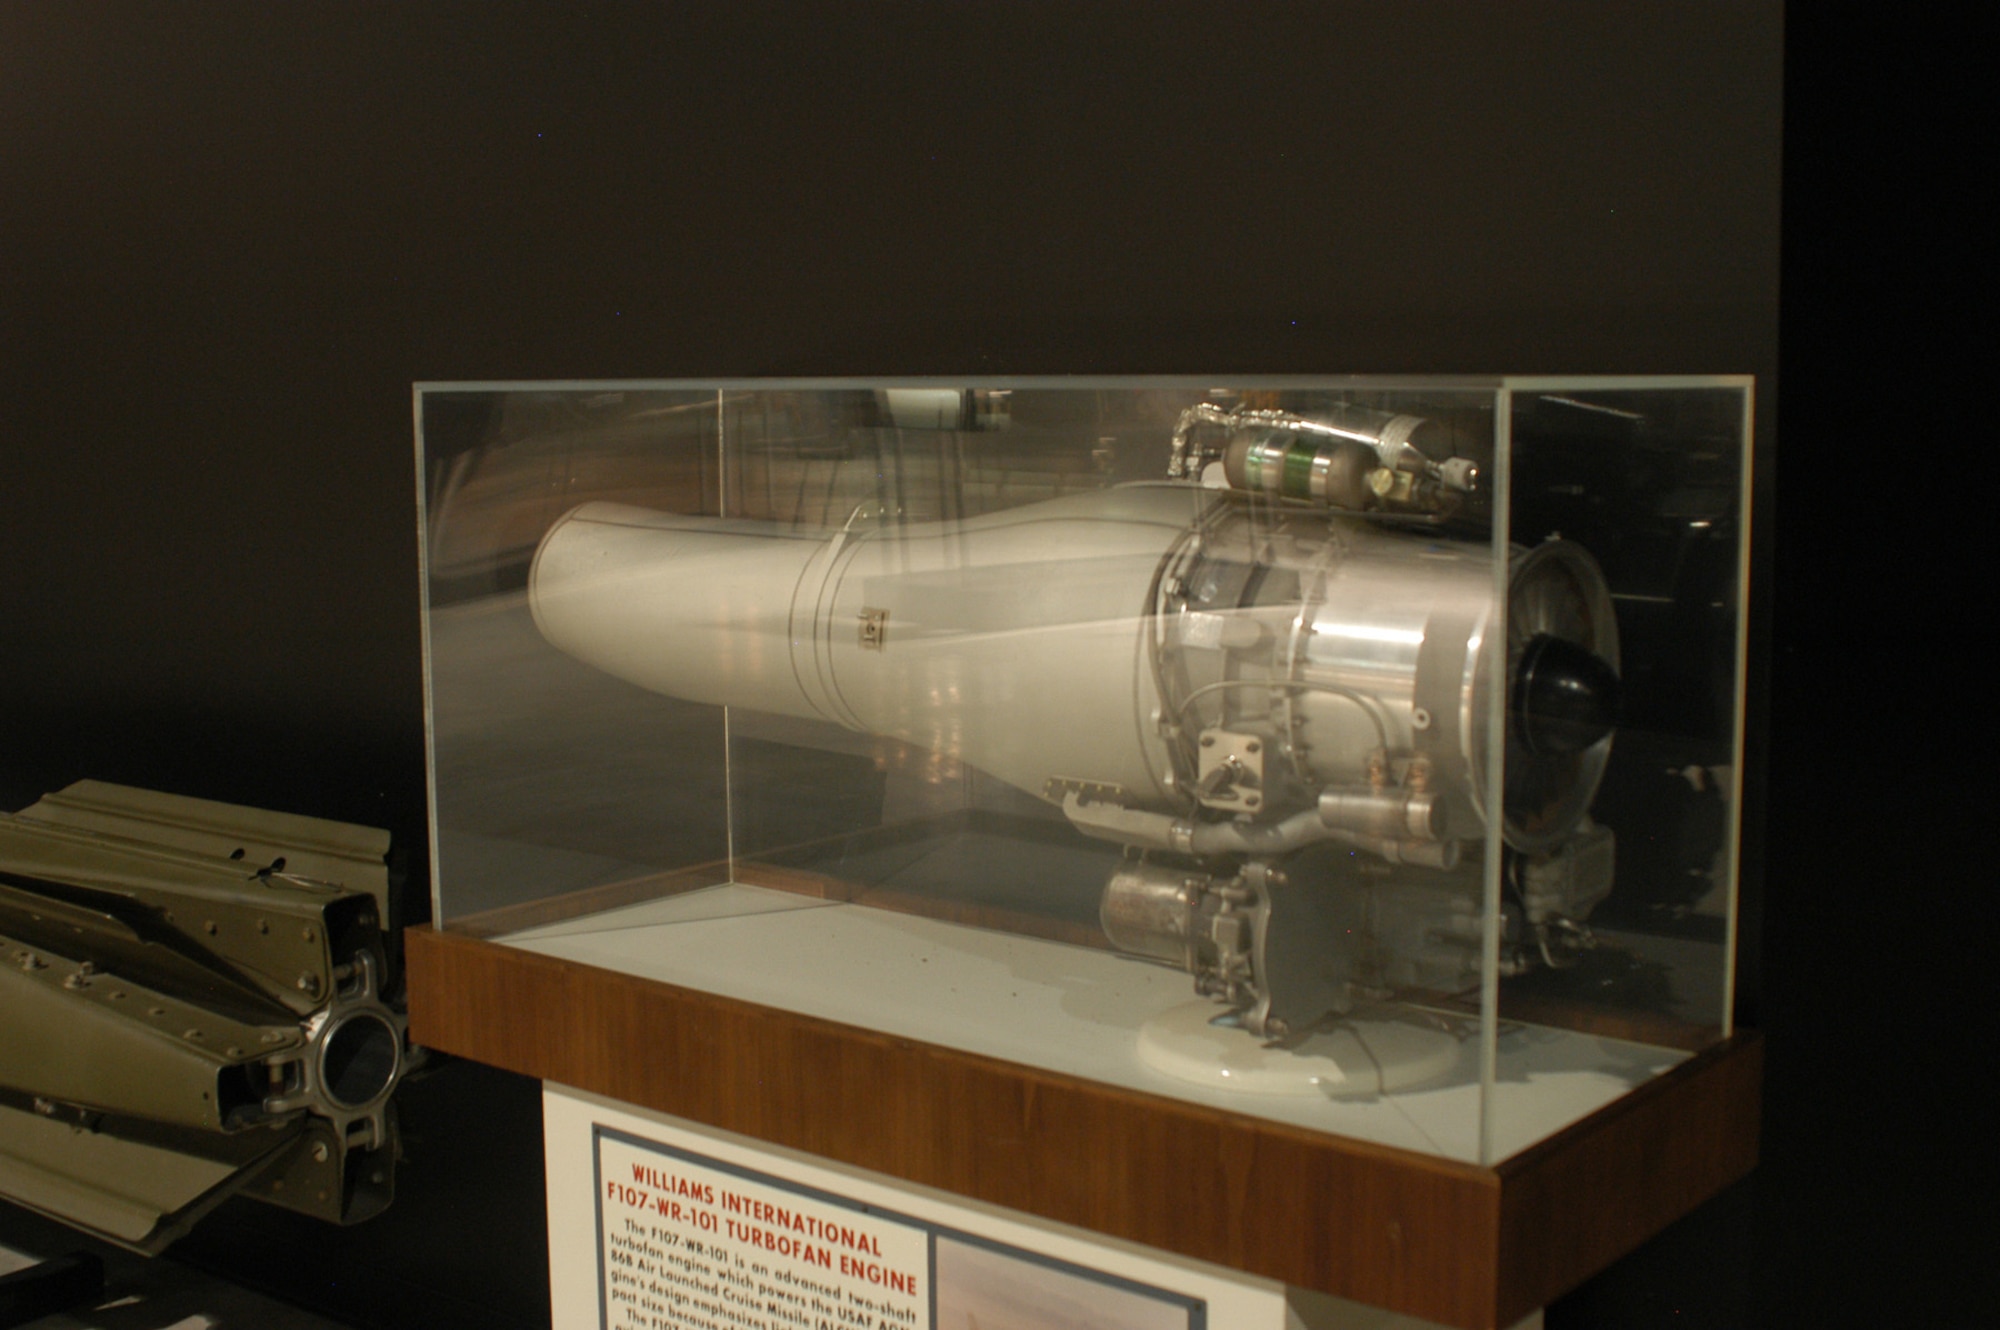 DAYTON, Ohio - Williams International F-107 engine on display at the National Museum of the U.S. Air Force. (U.S. Air Force photo)